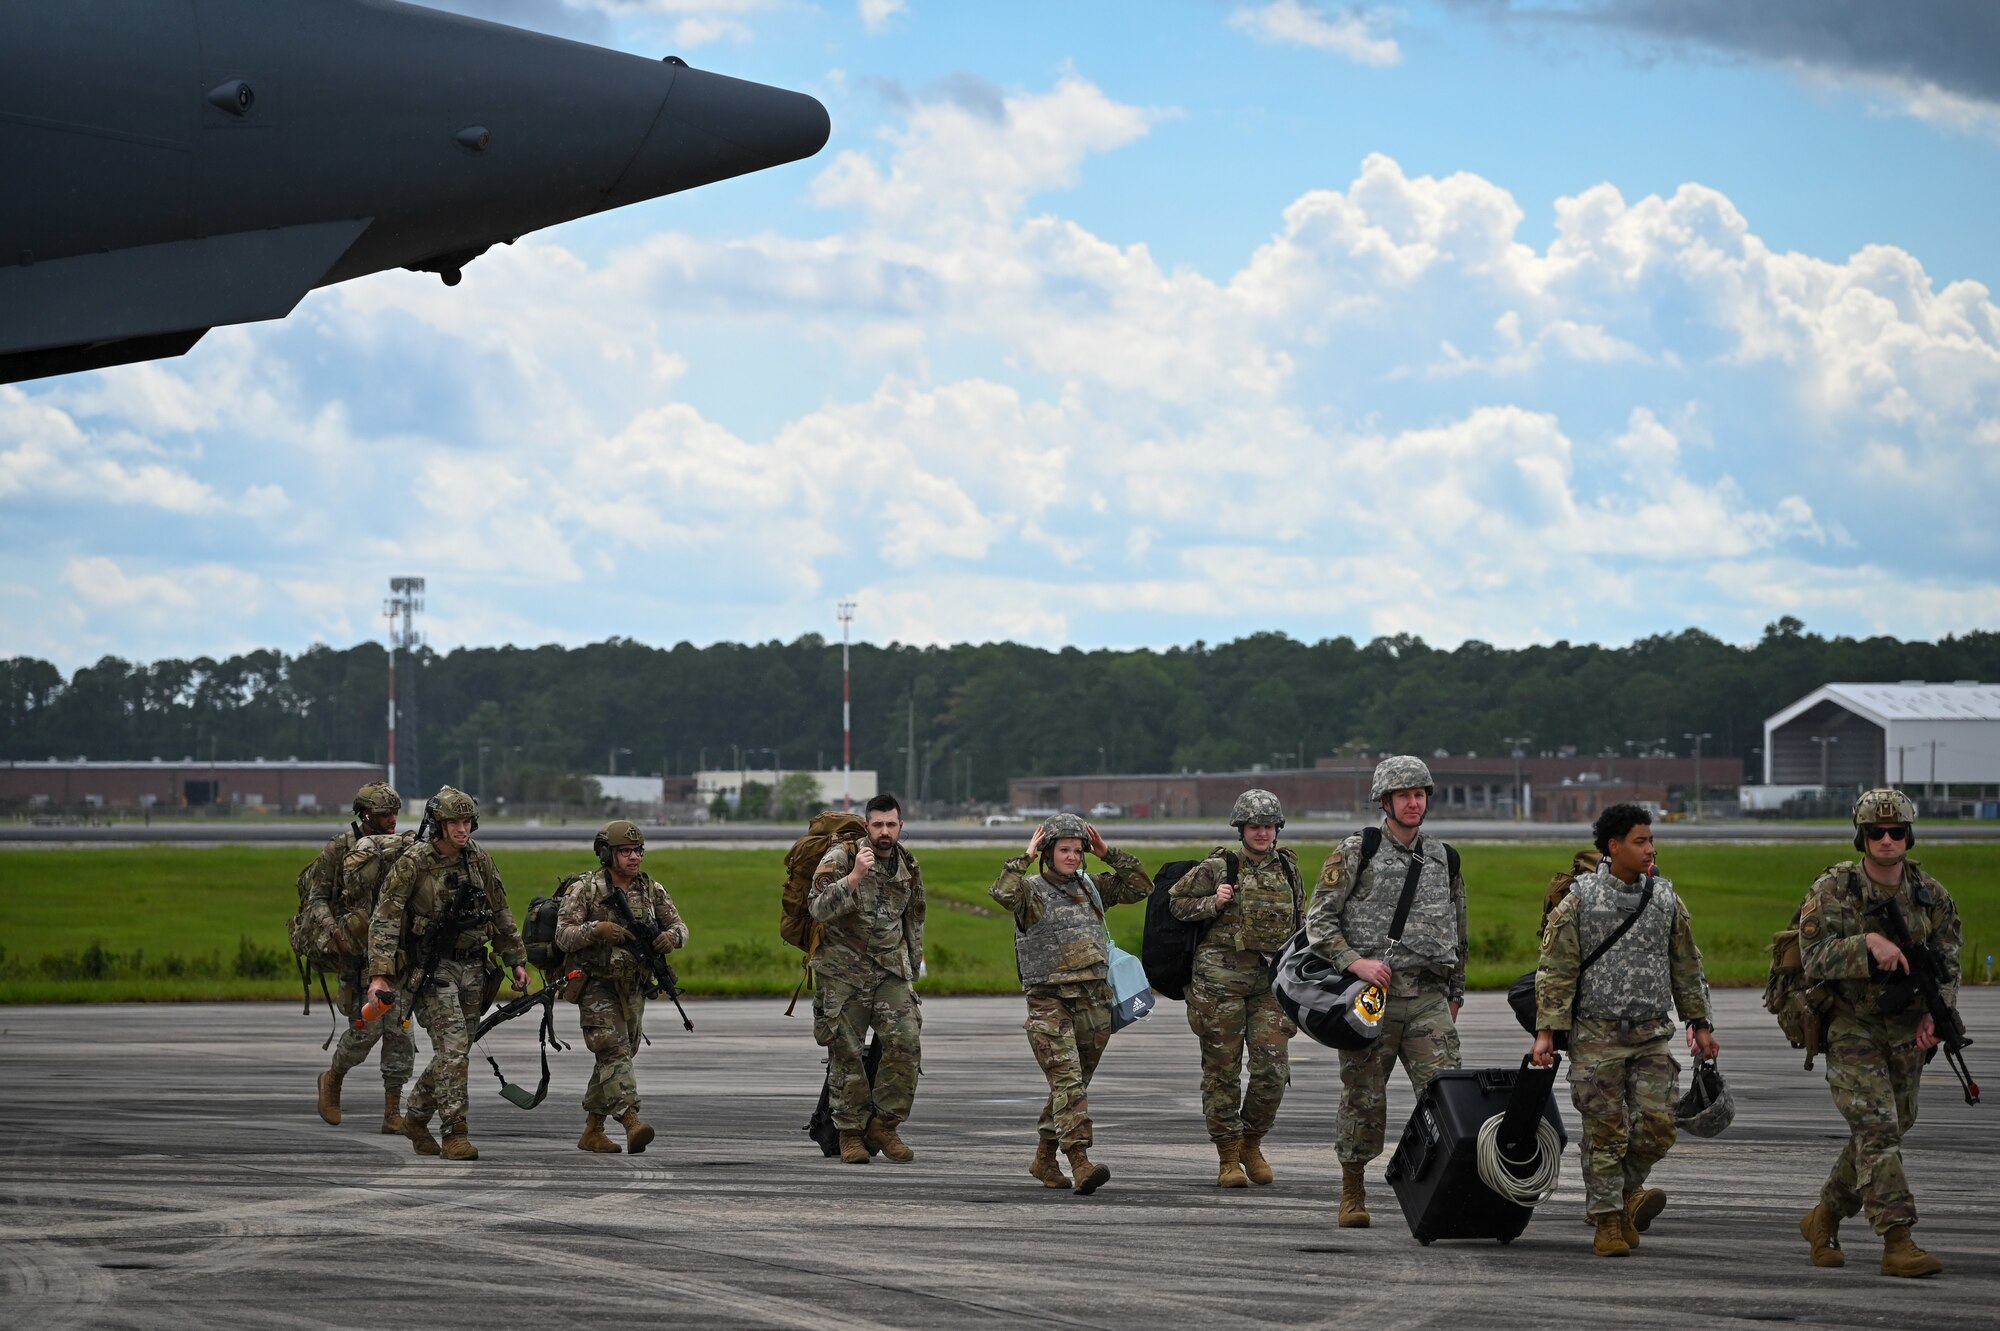 Airmen assigned to 4th Fighter Wing, Seymour Johnson Air Force Base, North Carolina, walk off the flight line to inprocess after landing at Marine Corps Air Station Cherry Point, North Carolina, July 24, 2023. RT-23 hosted employed air combat capabilities of approximately 45 aircraft from several active and reservist Air Force and Marine Corps commands and for the first time, the F-35B Lightning II assigned to Marine Aircraft Group 31 and MAG-14 (U.S. Air Force photo by Airman 1st Class Leighton Lucero)